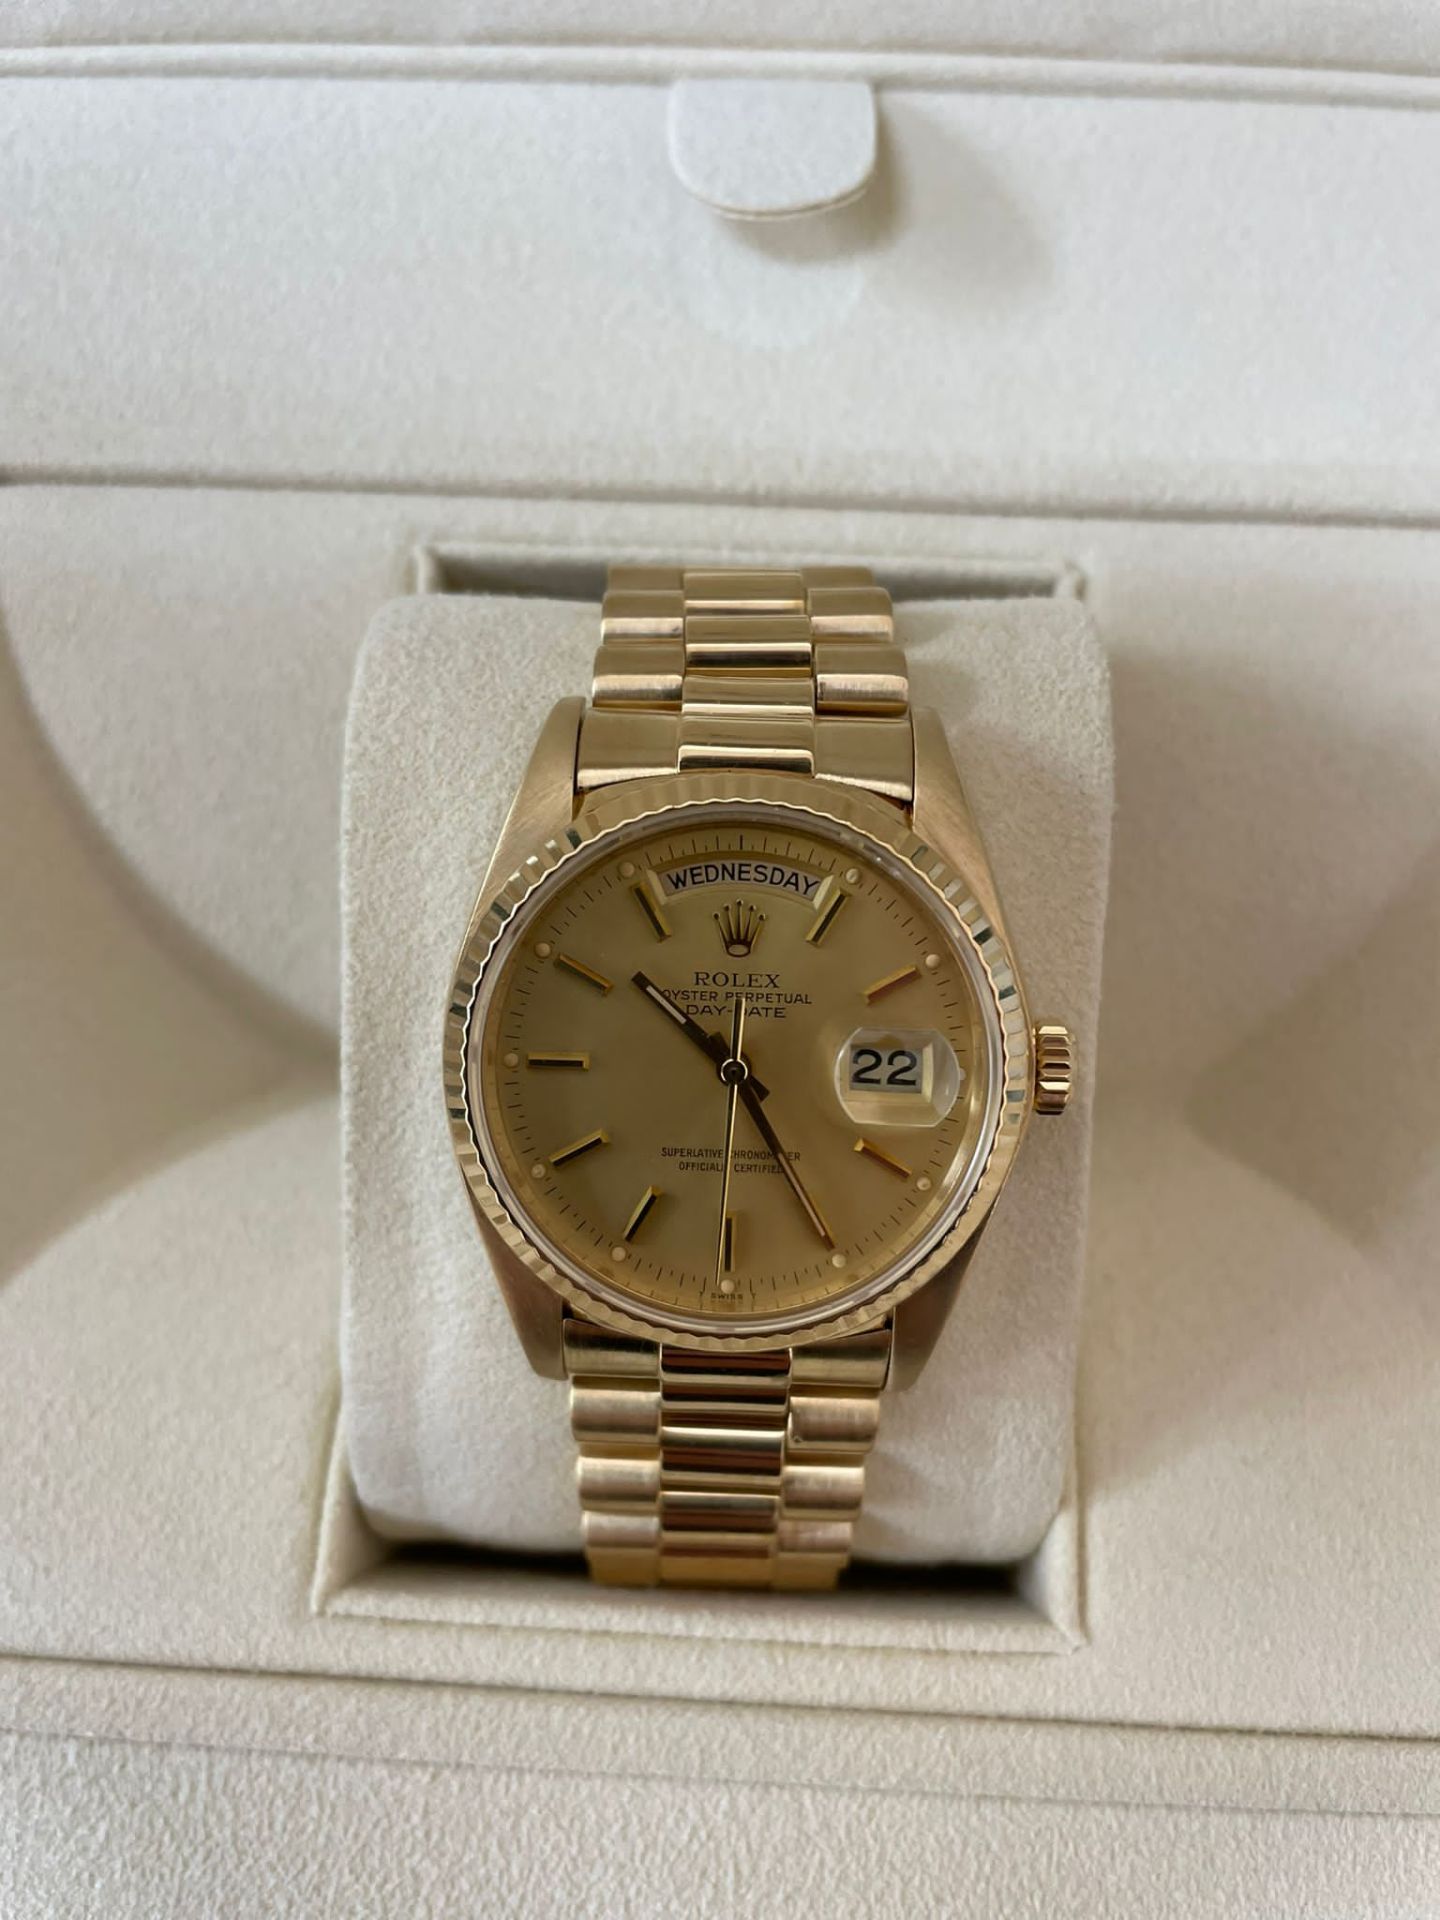 18K ROLEX DAY DATE PRESIDENT WRIST WATCH (36MM) / SERVICED WITH PAPERWORK* & £28,550 VALUATION